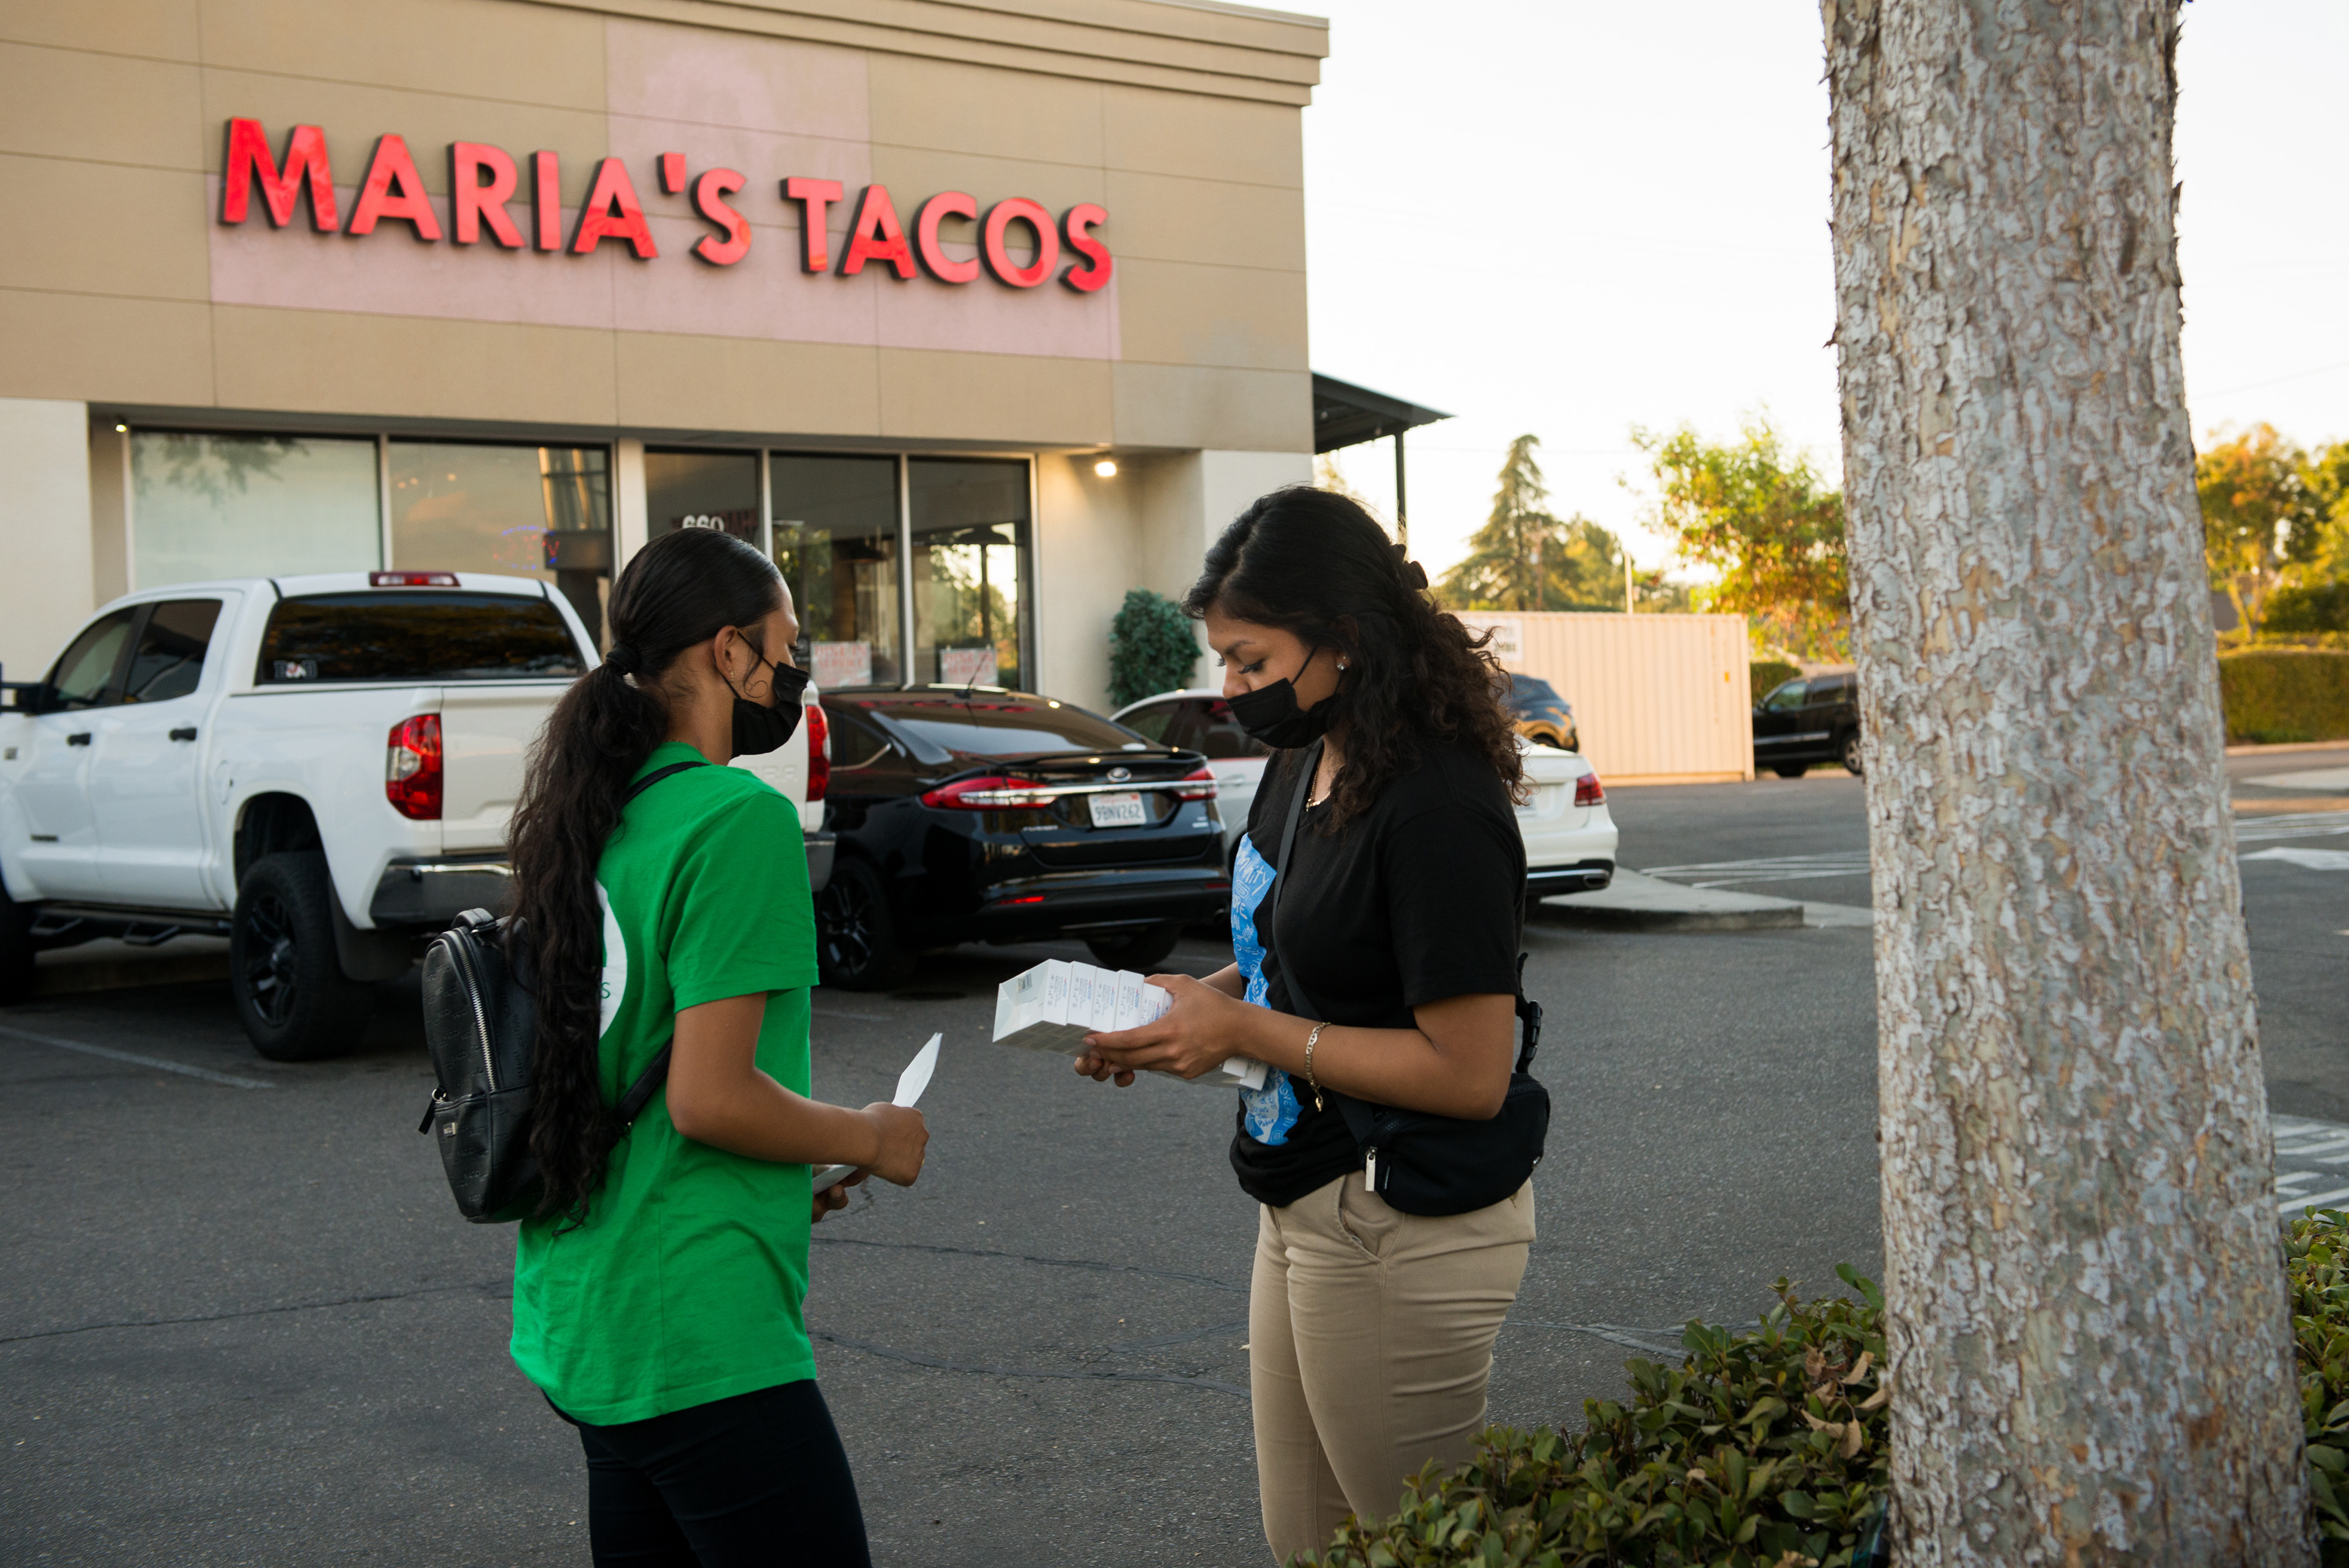 Melissa Lopez (left) and Alma Gallegos (right) get ready to distribute covid tests. They are standing in the parking lot in front of a building that says "Maria's Tacos."